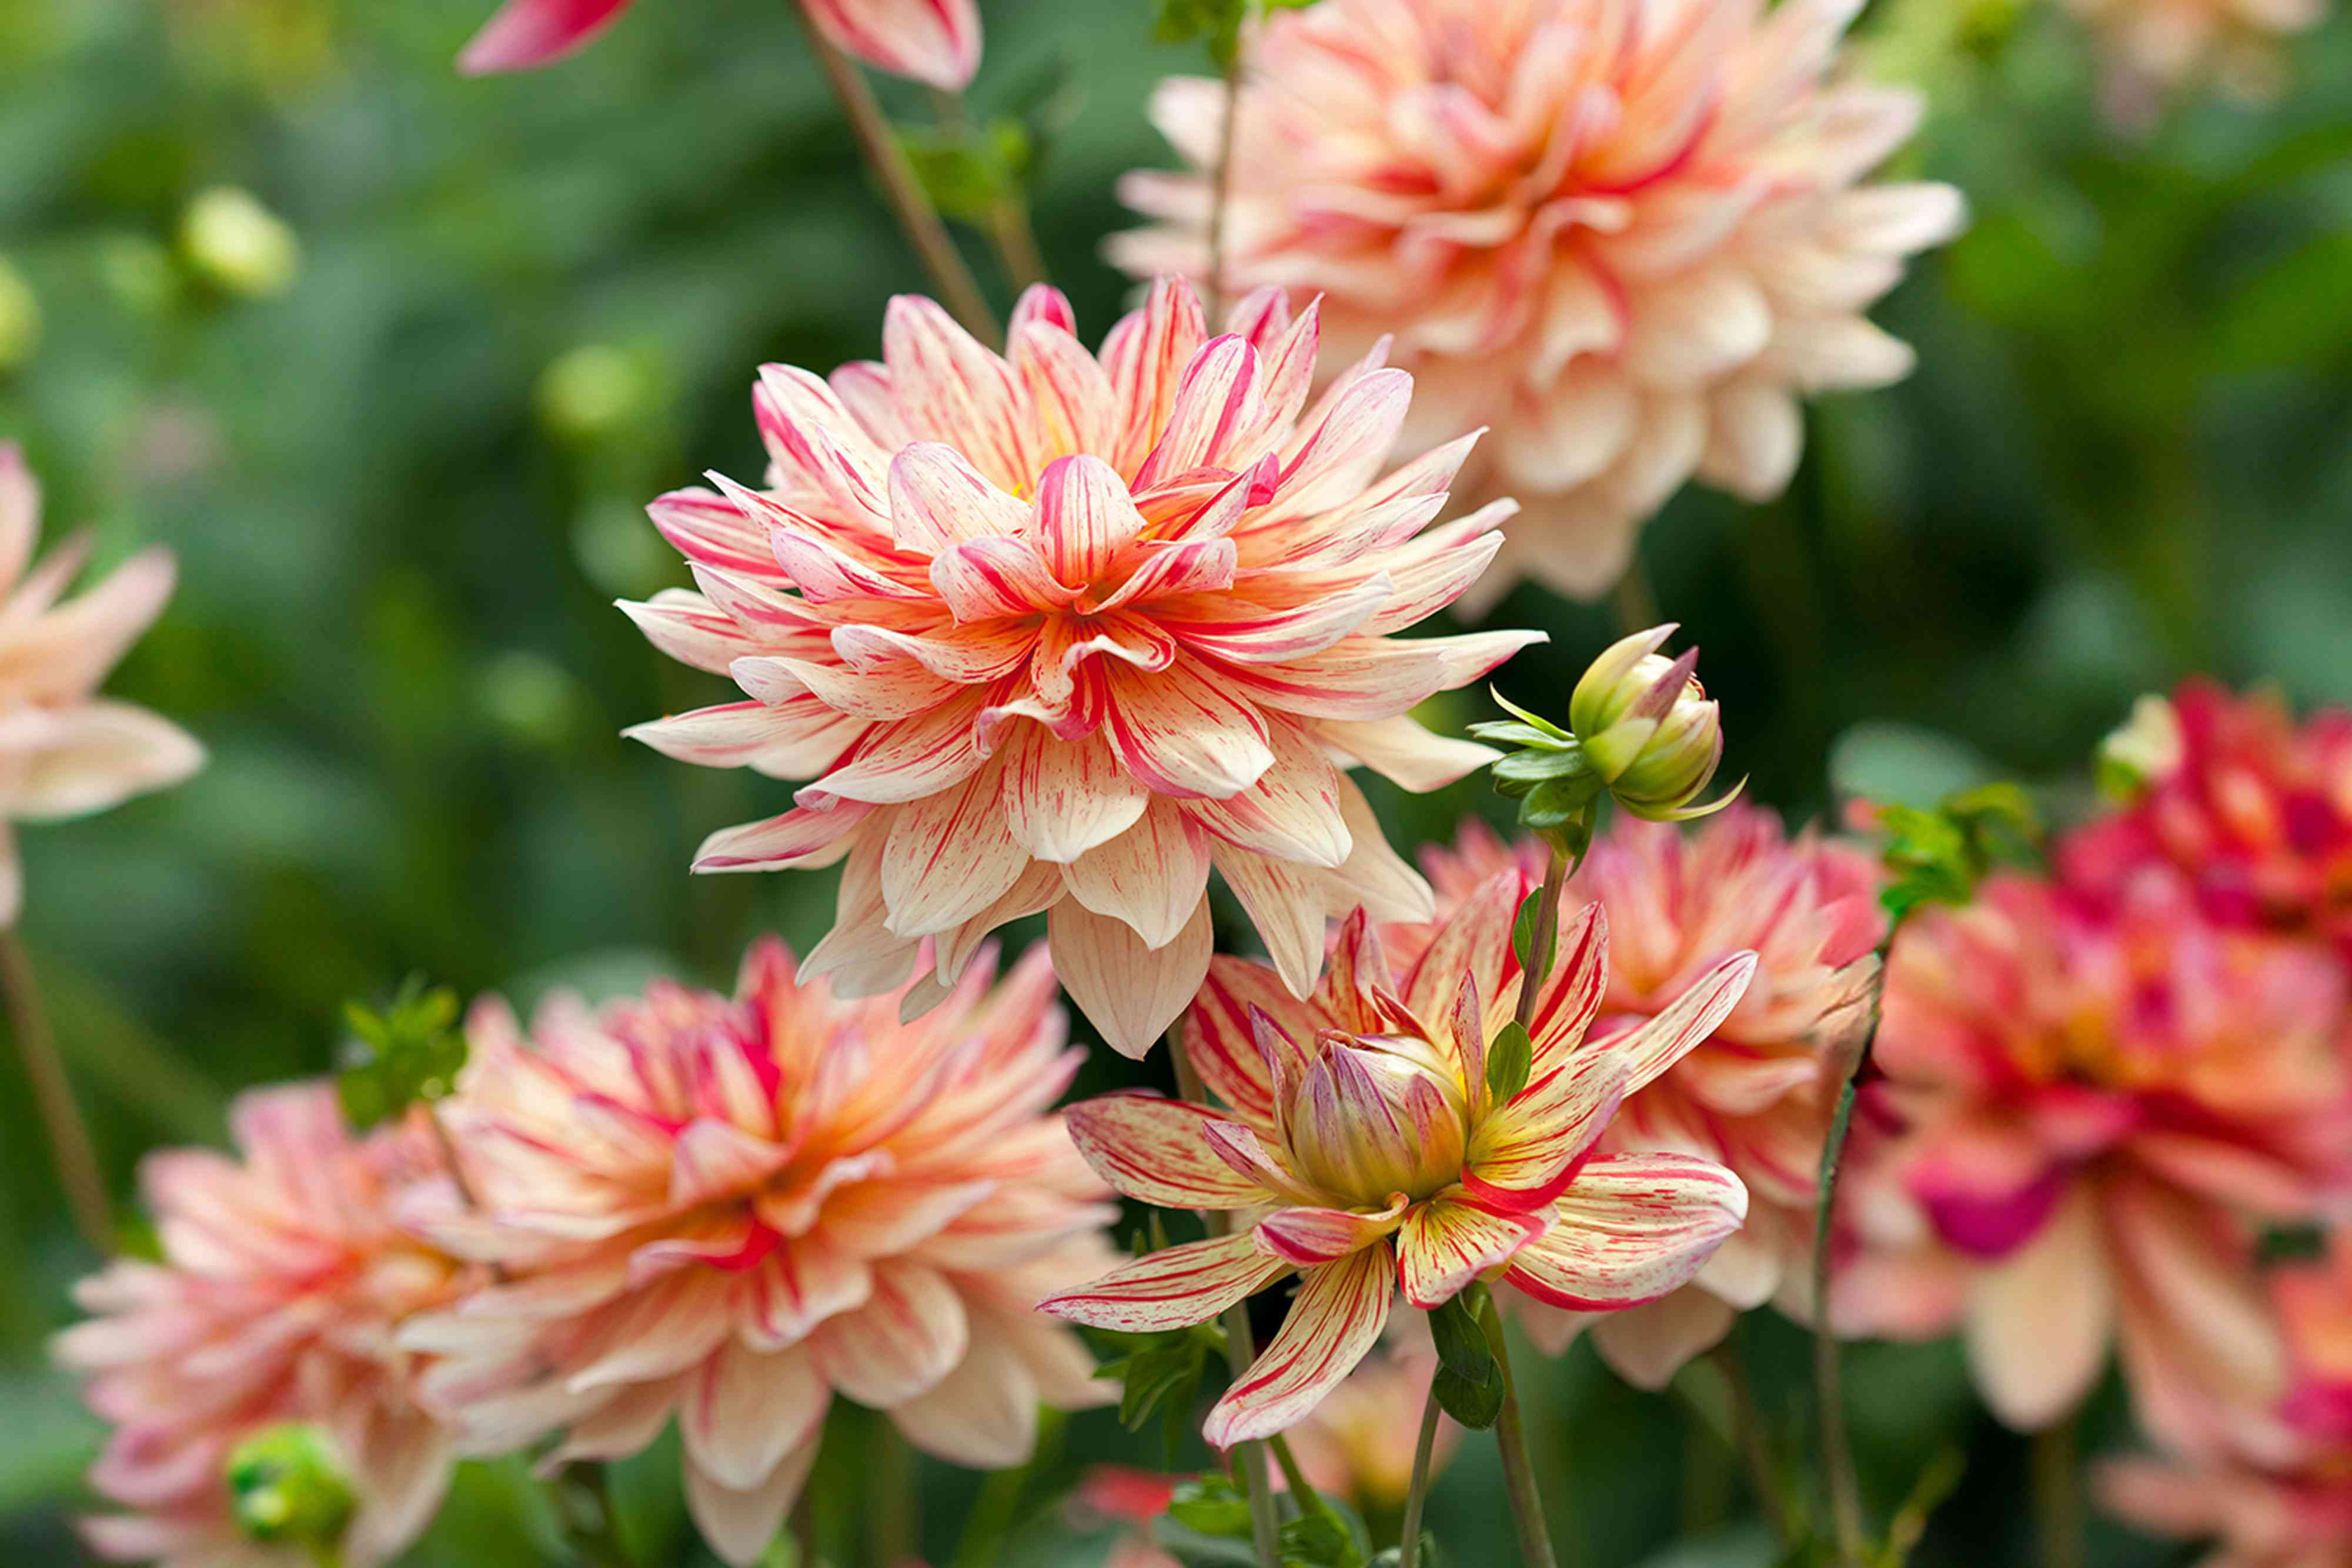 How to Plant Dahlia Tubers for Their Colorful Summer Flowers